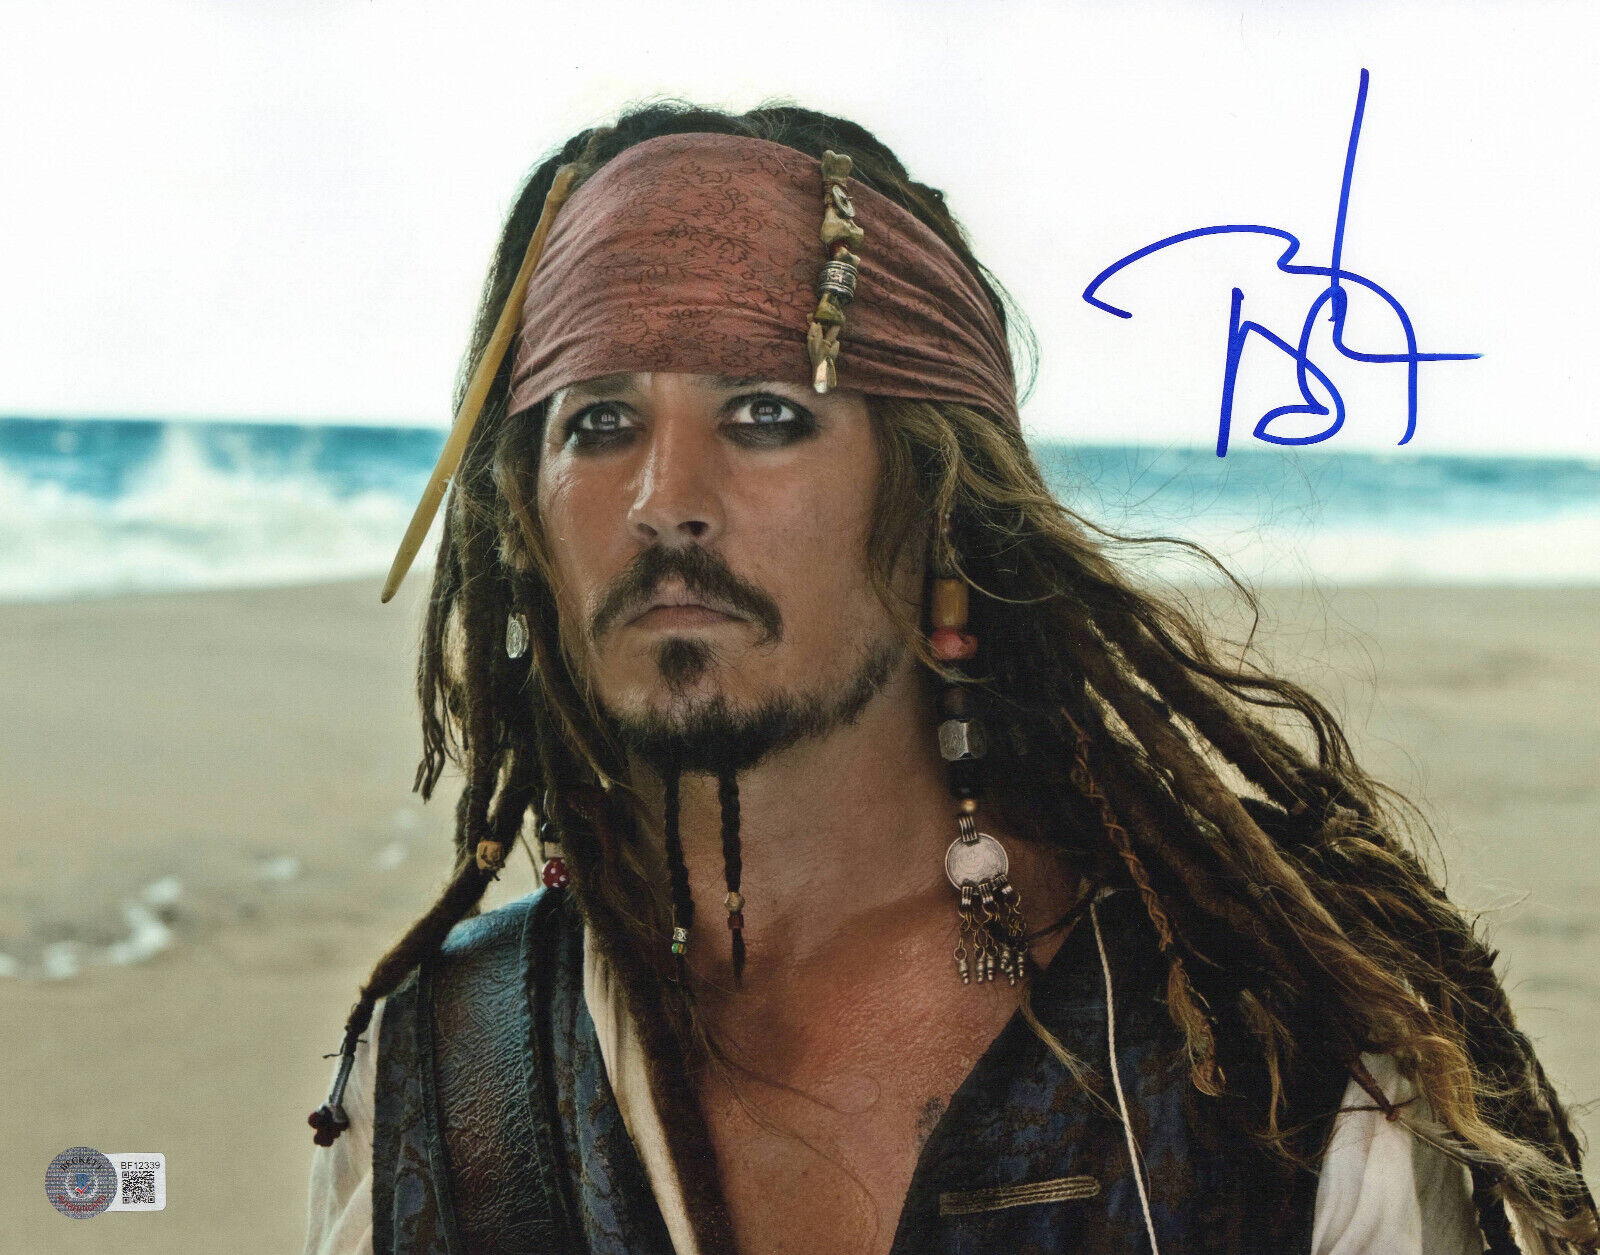 JOHNNY DEPP 'PIRATES OF THE CARIBBEAN' SIGNED AUTOGRAPH 11X14 PHOTO BECKETT BAS 